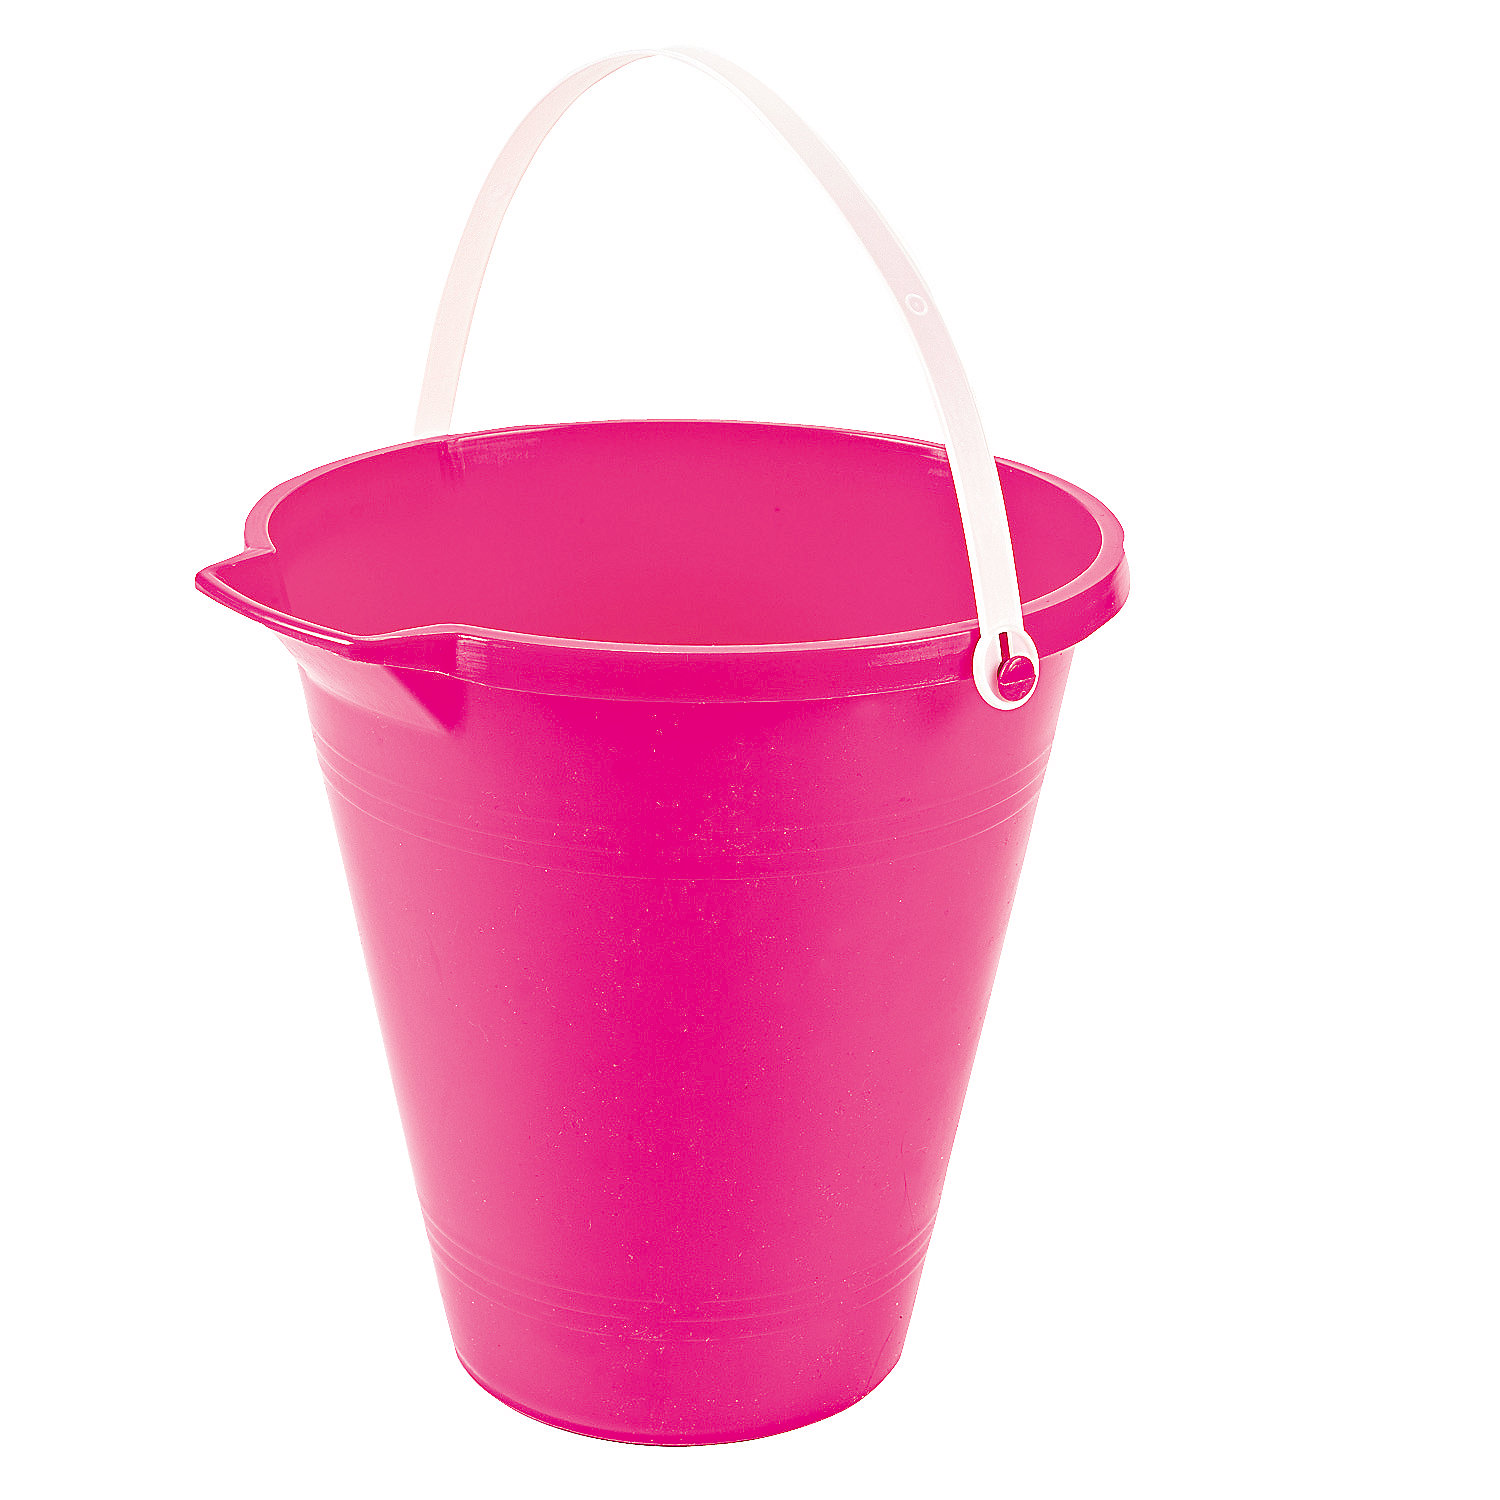 Fun Express - Pink Sand Bucket - Toys - Active Play - Beach Toys - 1 Piece - image 1 of 2